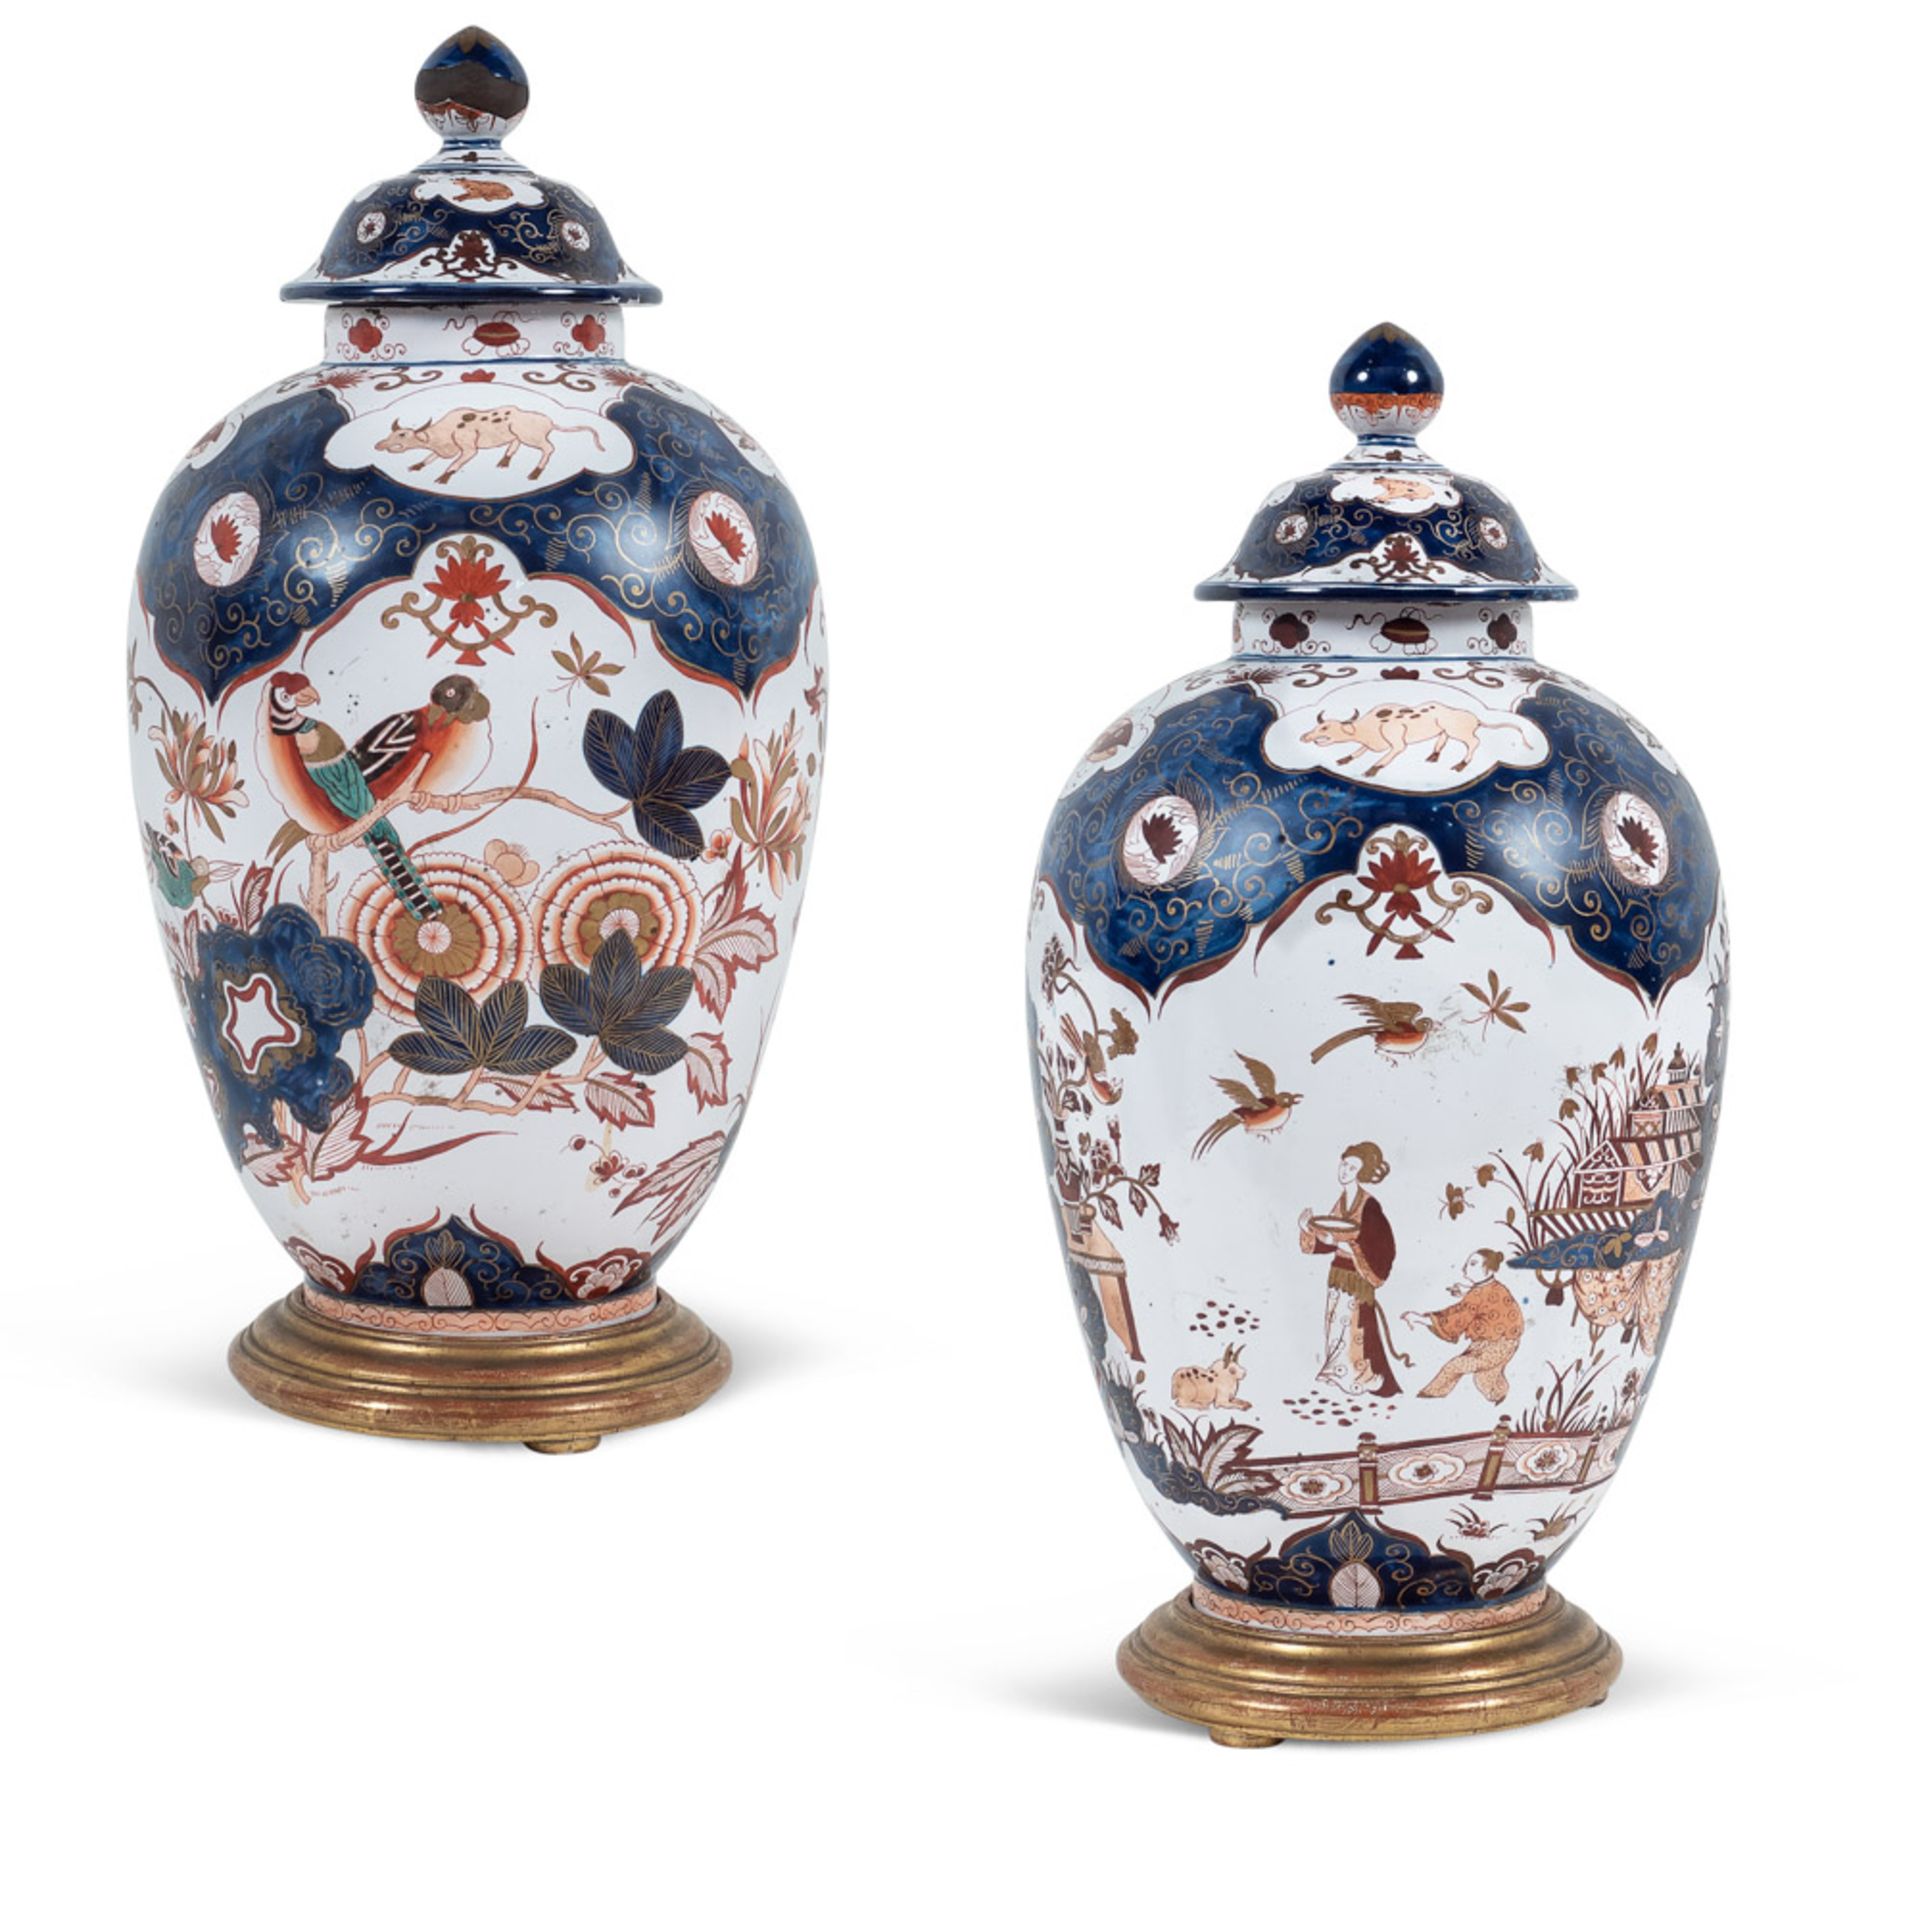 Pair of polychrome porcelain potiches Italy, 18th-19th century h. 54 cm.